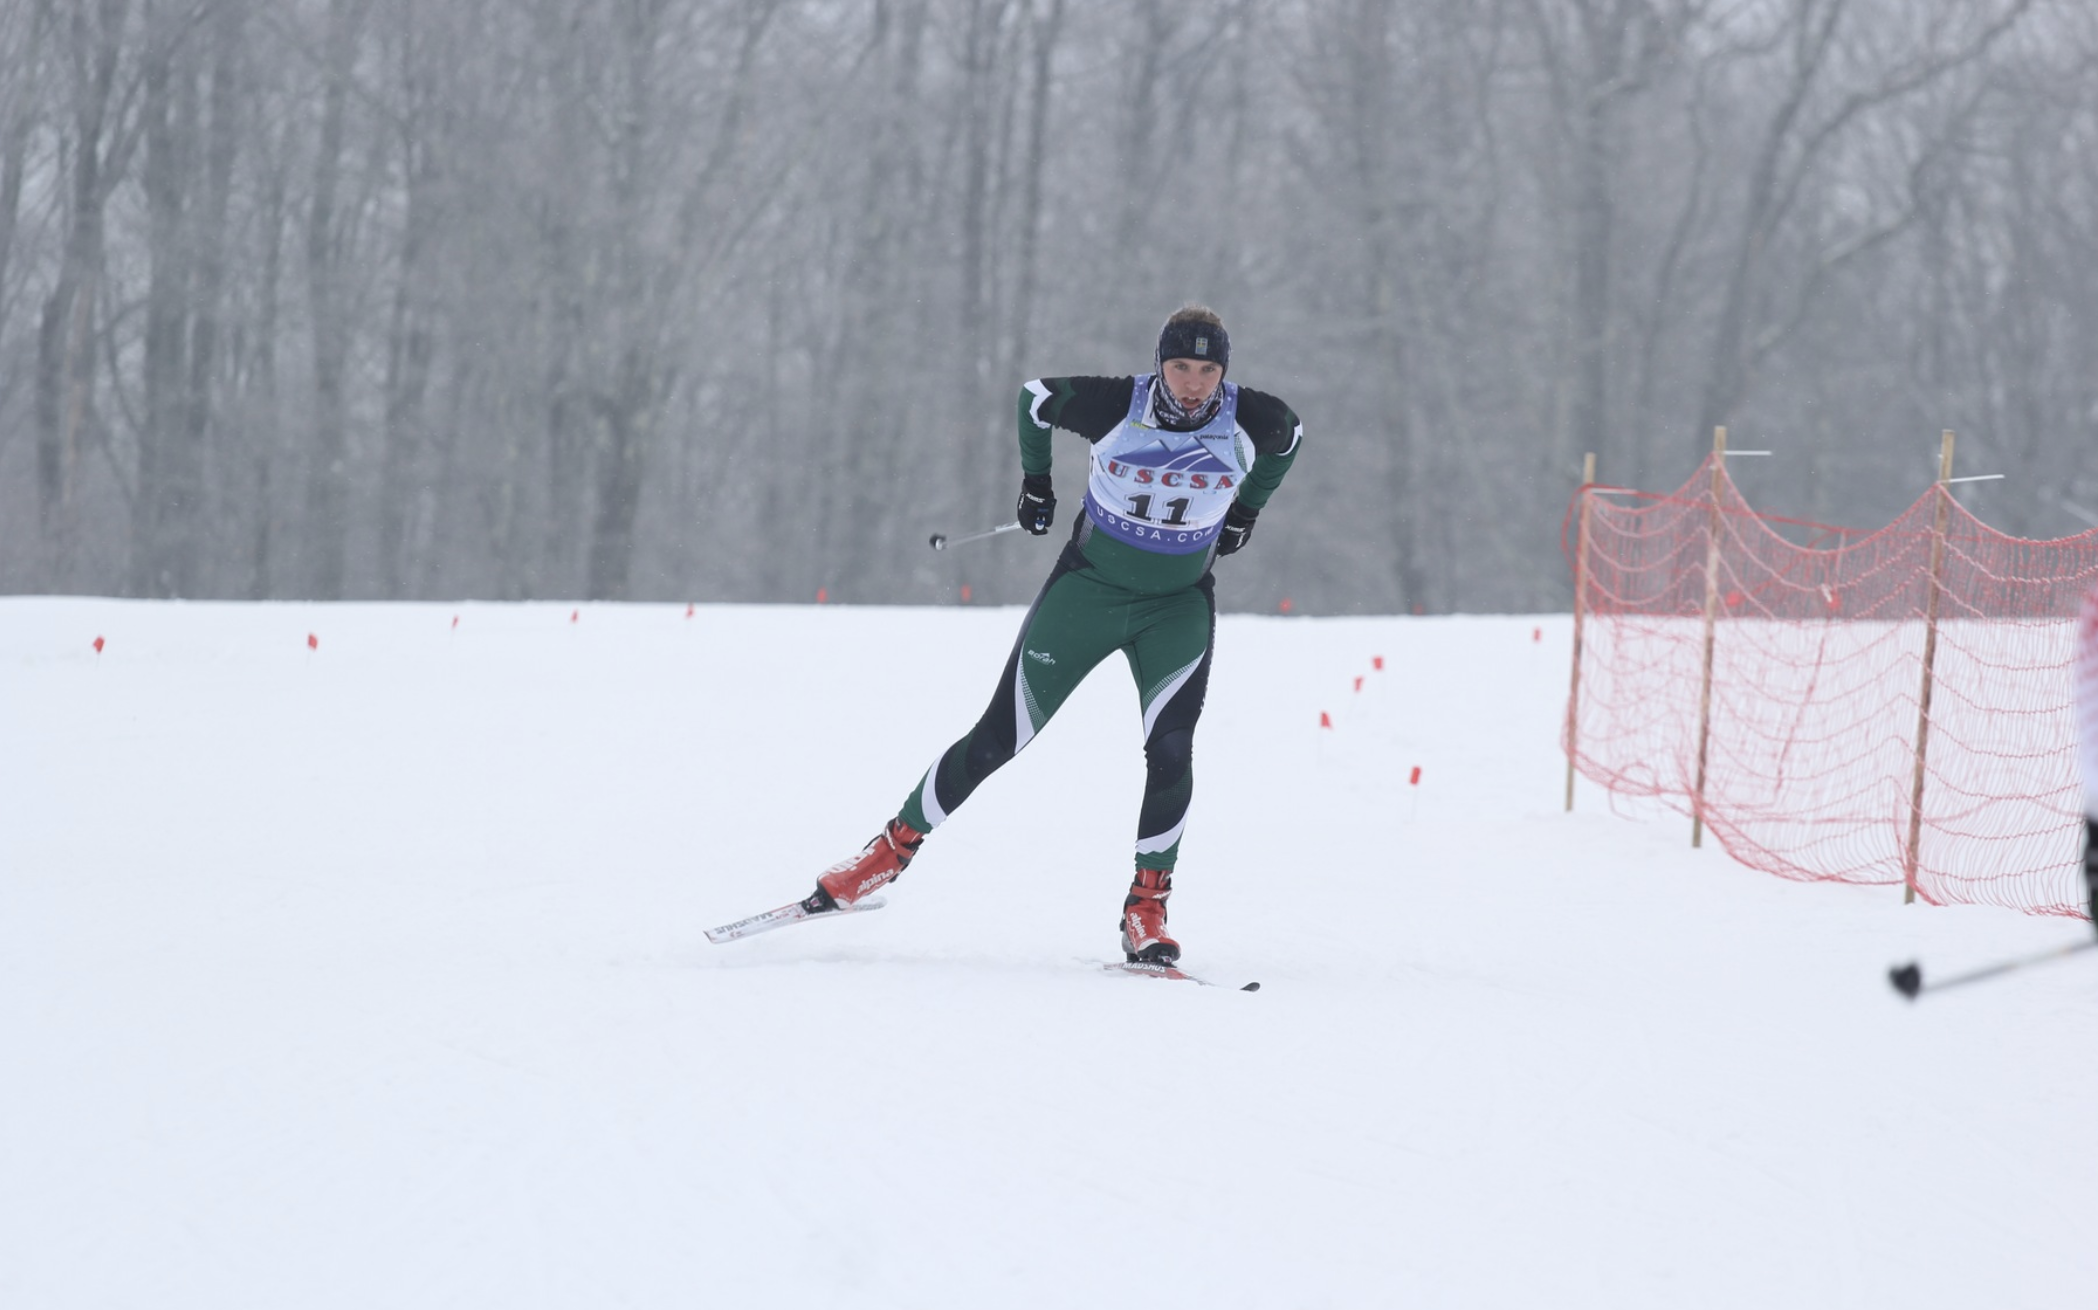 Nordic skiers dominate the trails